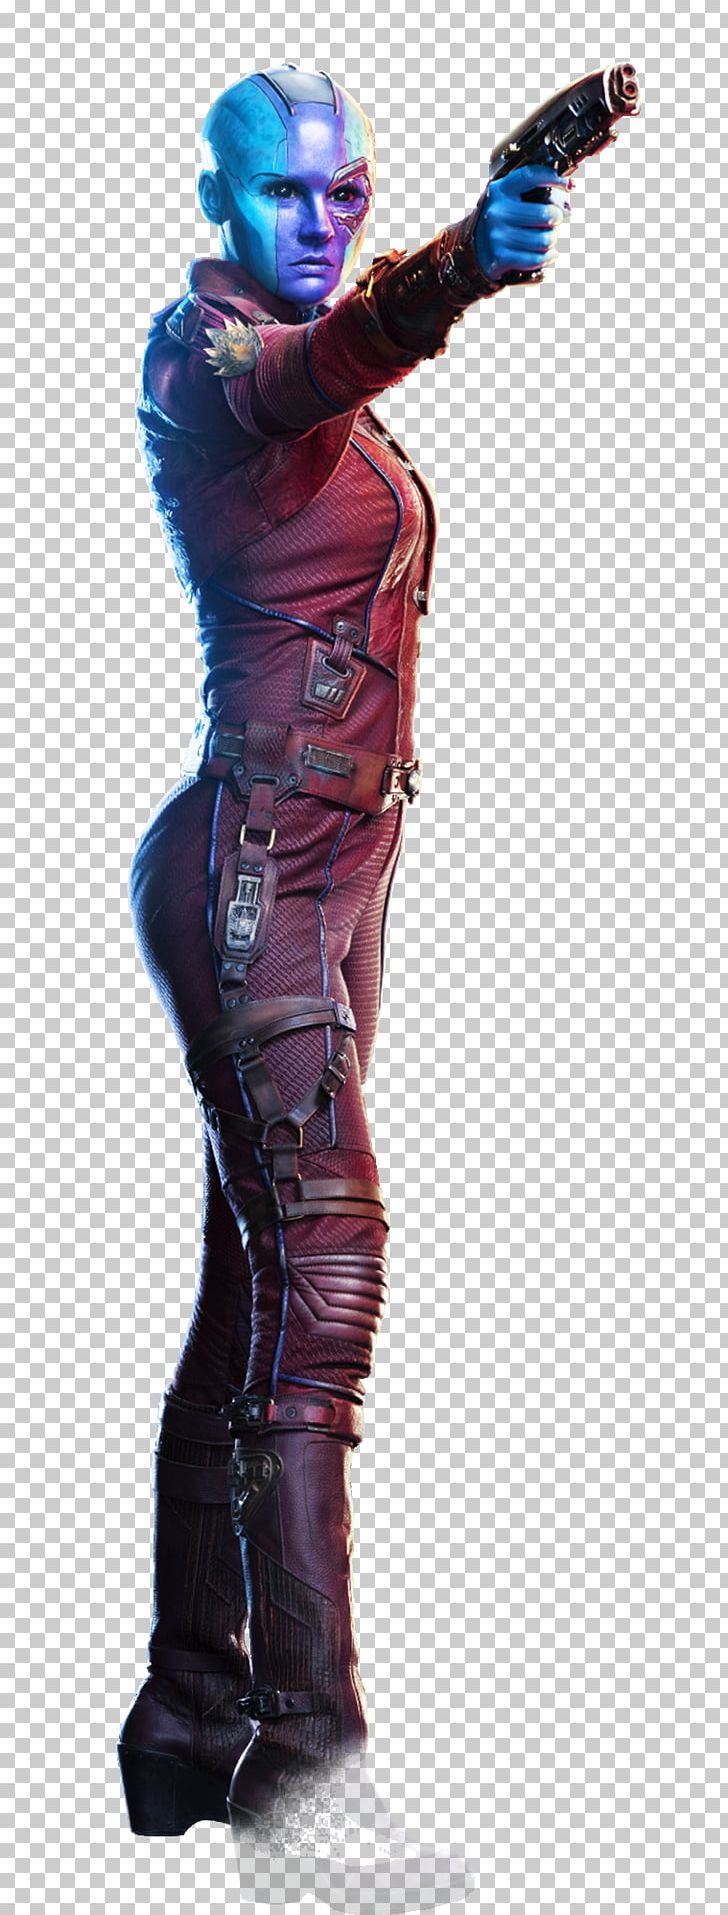 Yondu Guardians Of The Galaxy Vol. 2 Nebula Star-Lord Gamora PNG, Clipart, Antman, Avengers Infinity, Cannonball, Comic, Costume Free PNG Download